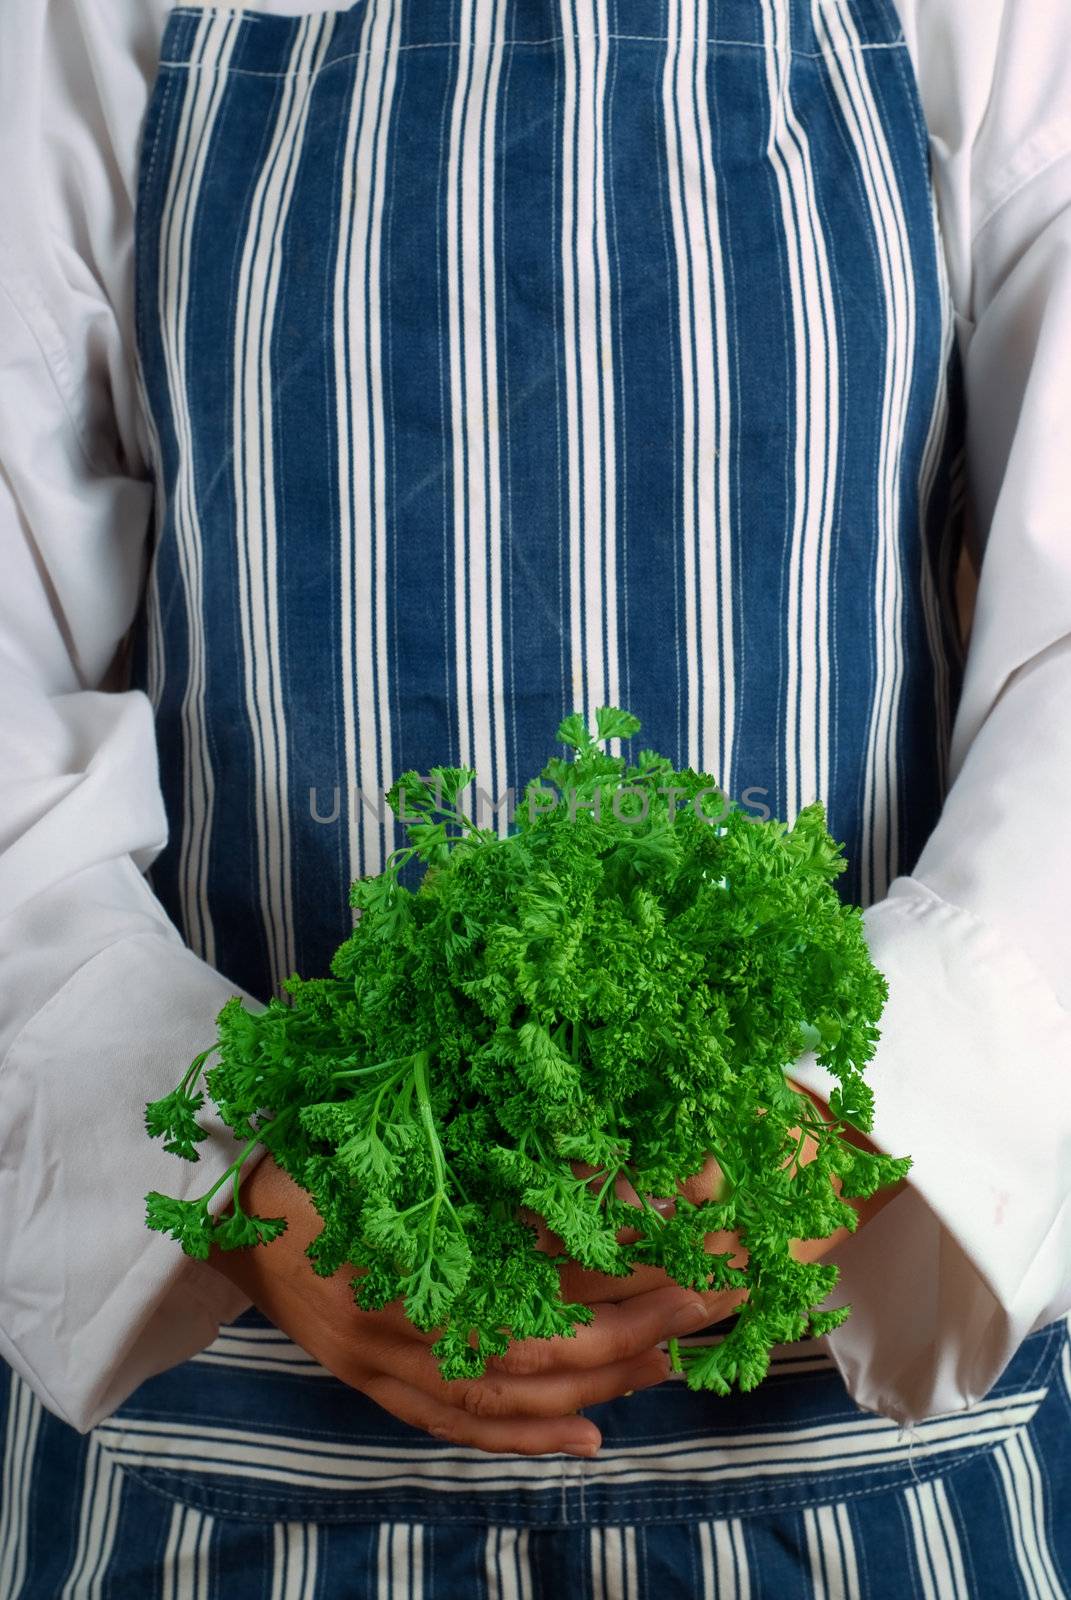 Woman cook or chef holding green parsley in her hands